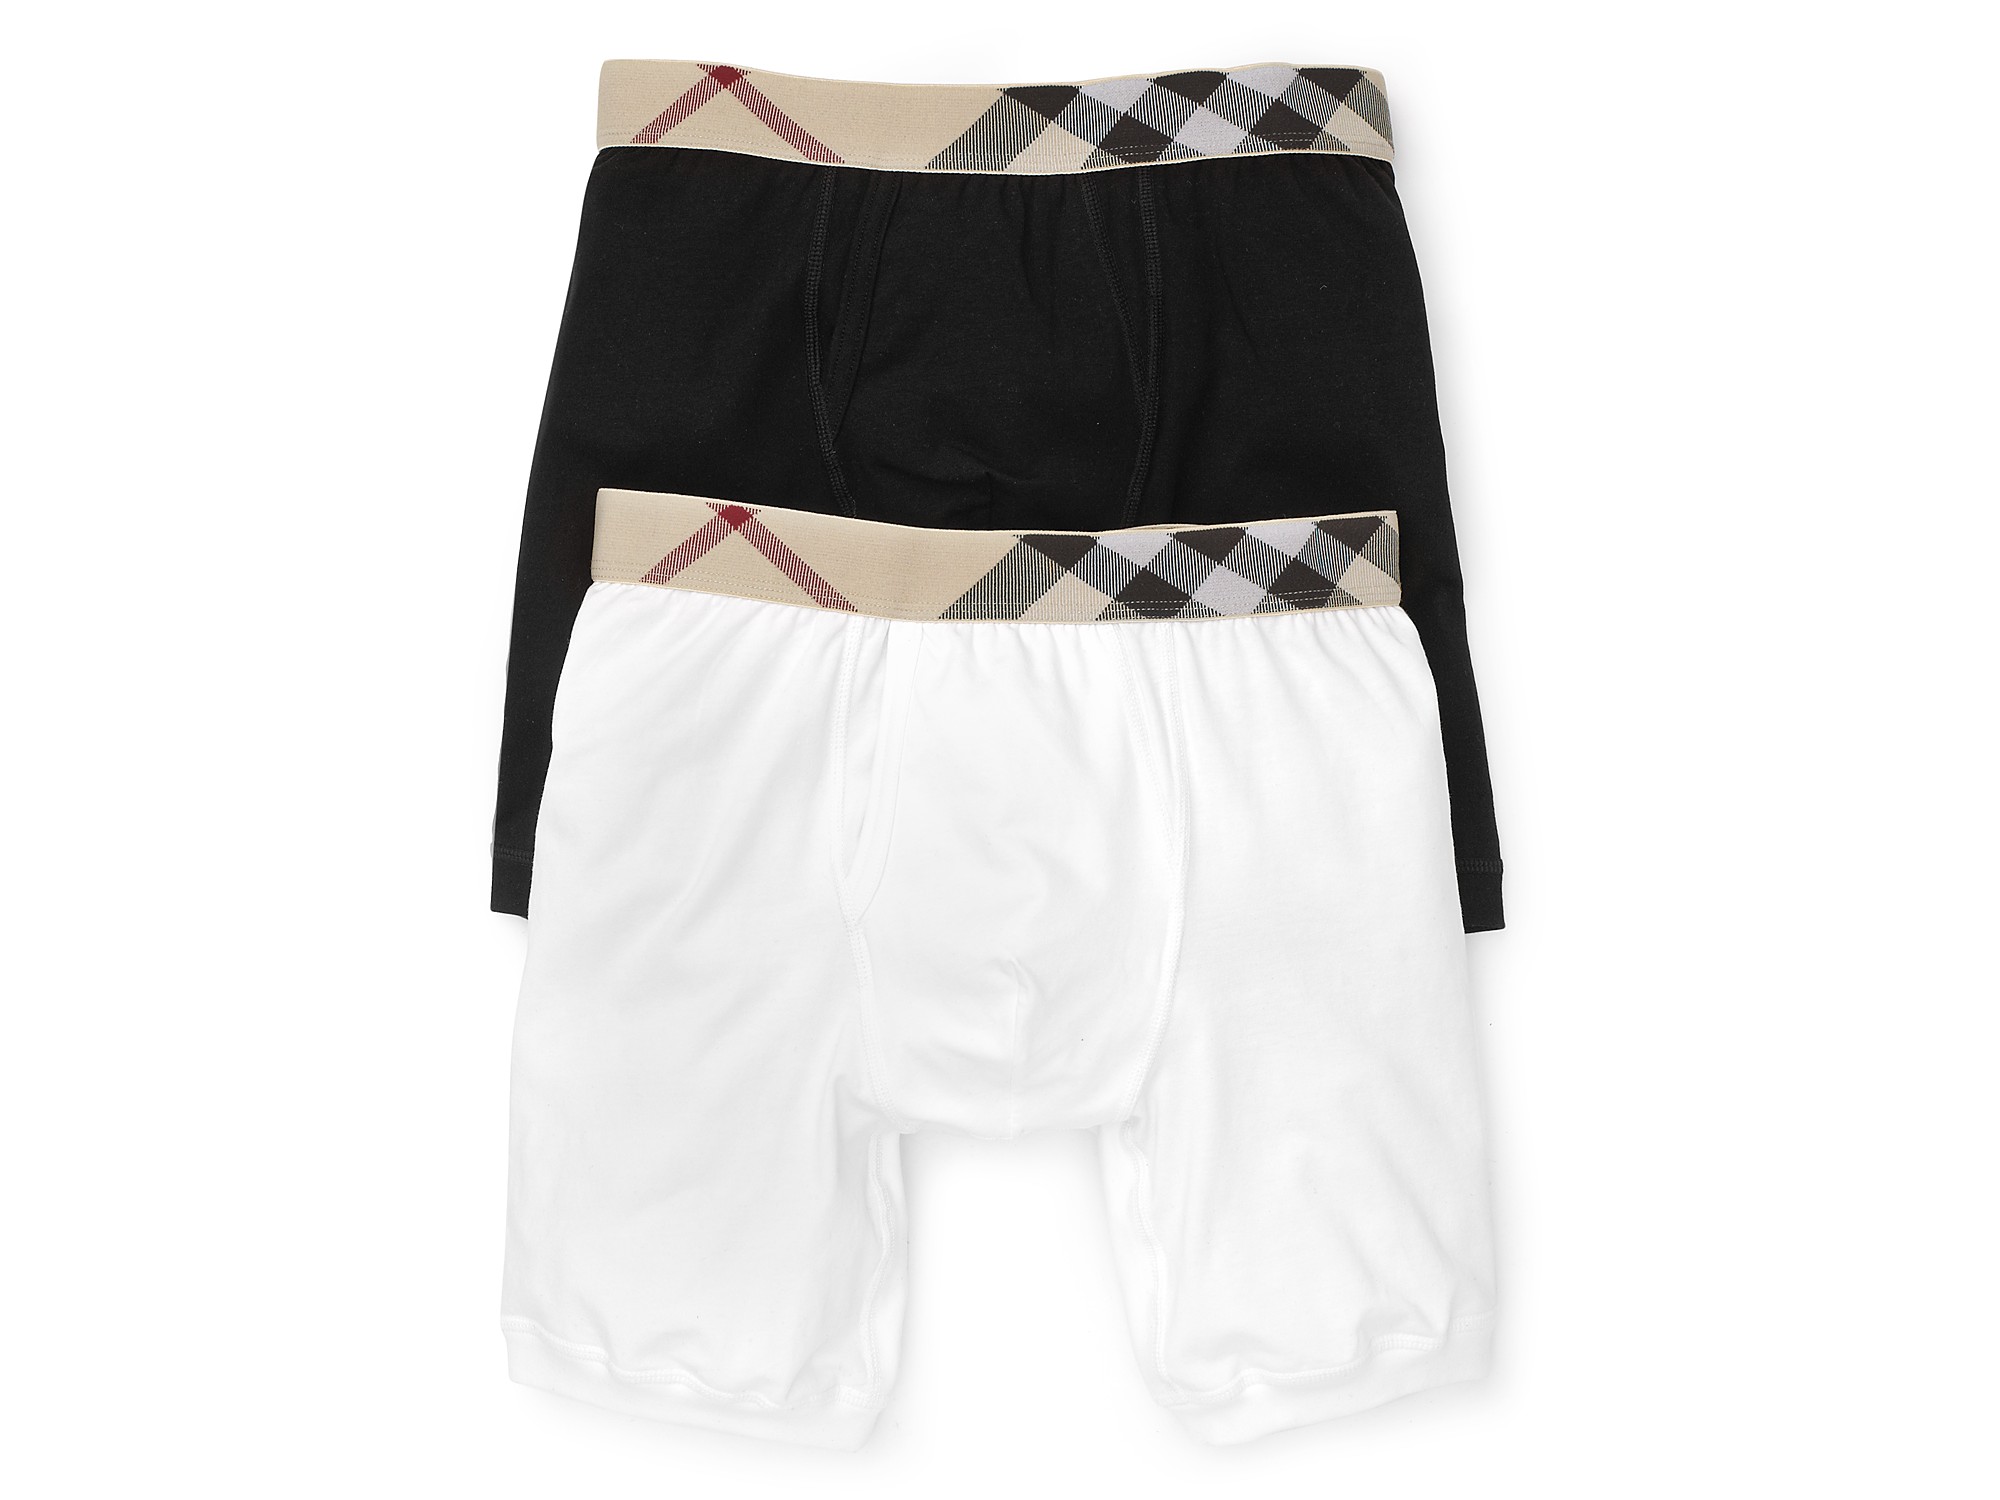 burberry boxers mens, OFF 70%,Cheap price!